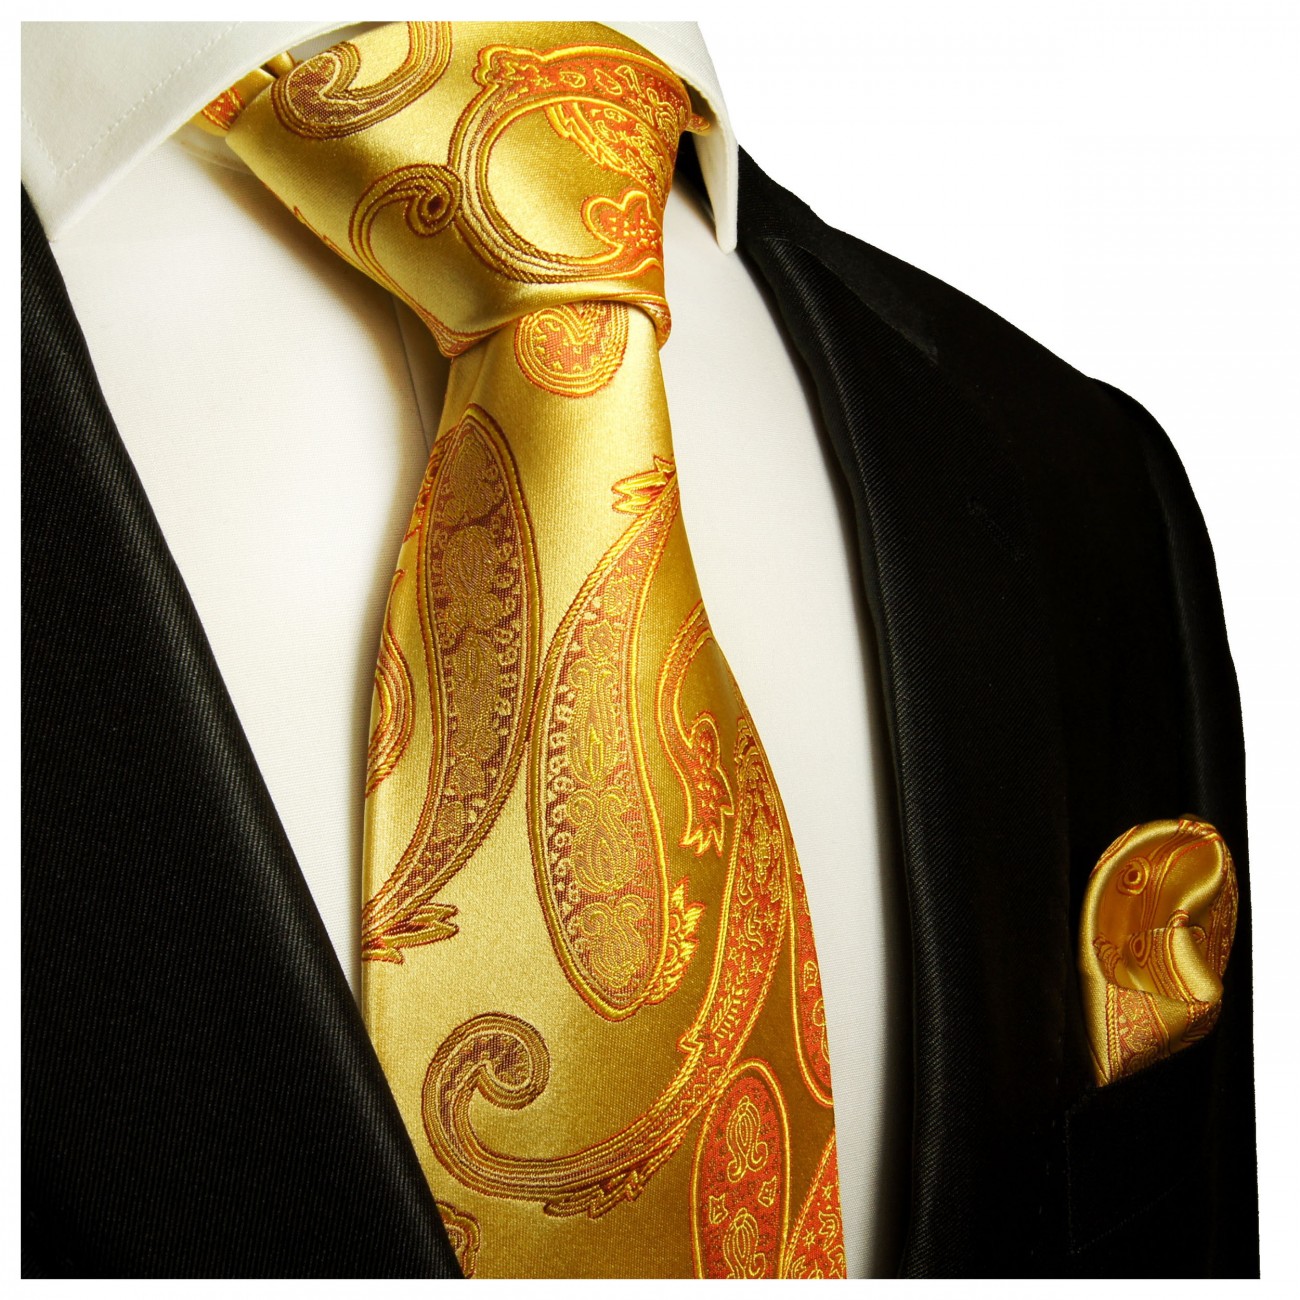 Gold tie paisley brocade 517 | ORDER NOW - Paul Malone Shop